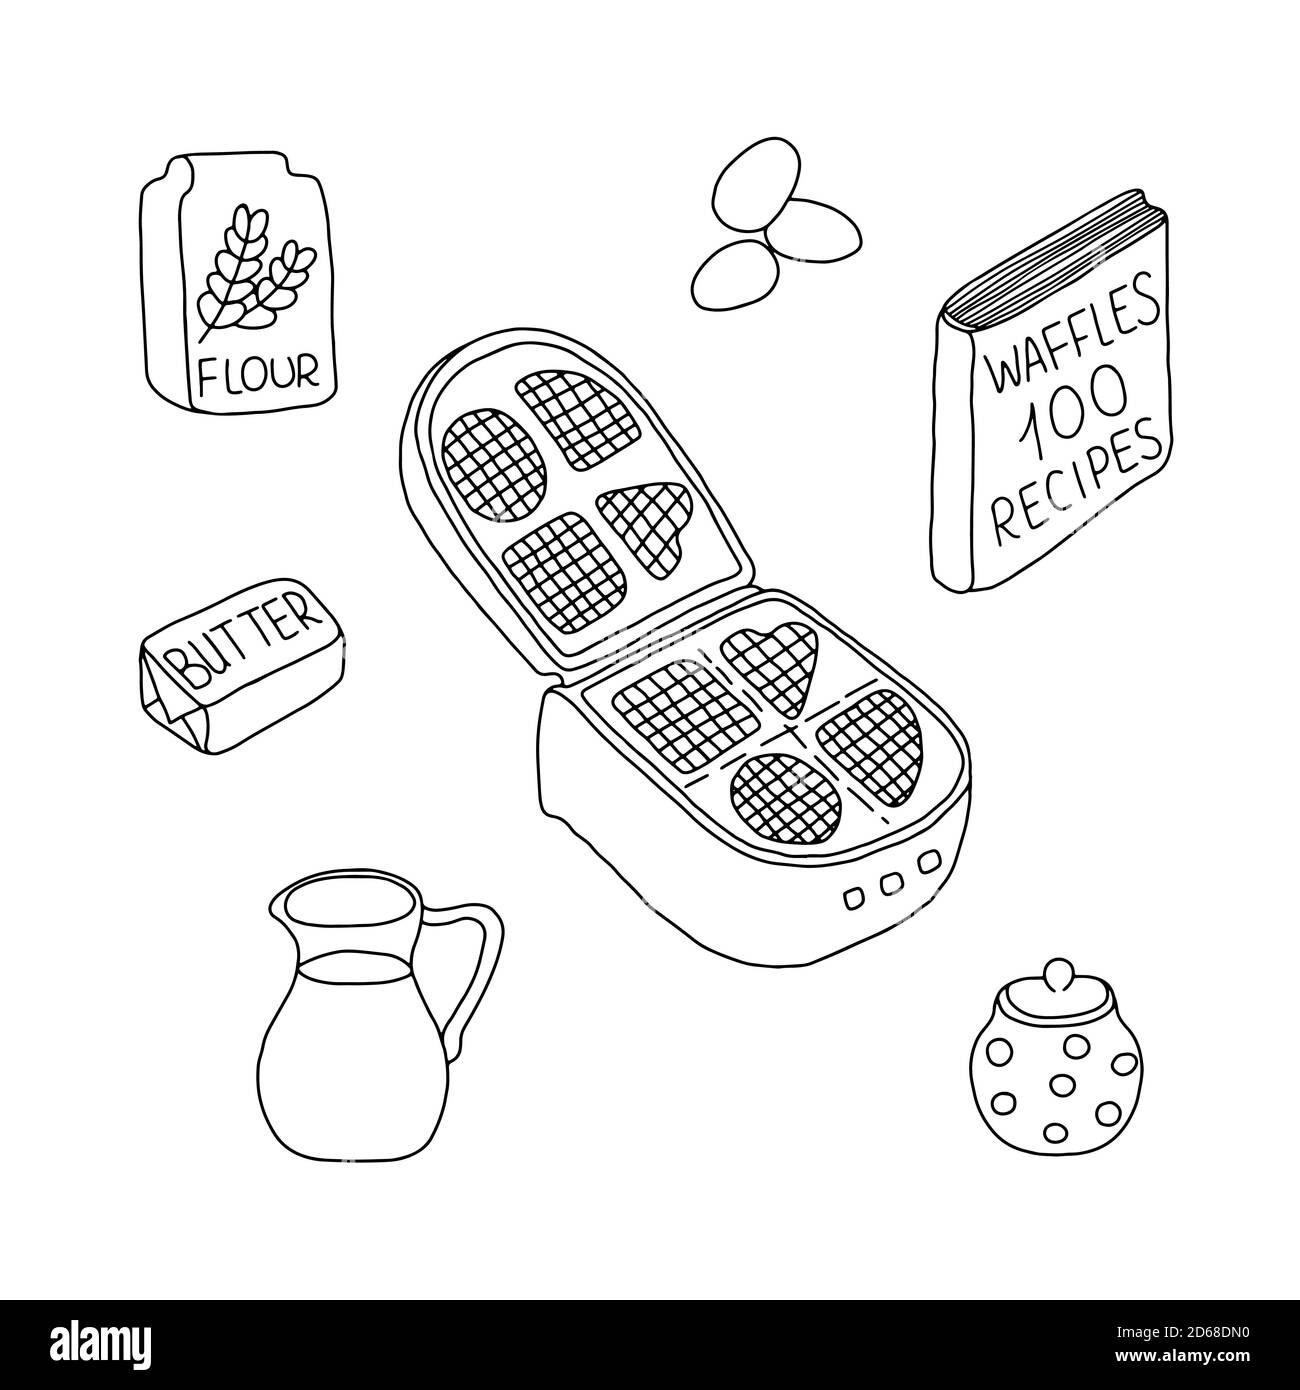 Outline vector hand drawn illustration of waffle iron, milk jar, butter, sugar-bowl, book of recipes, flour, simple pattern for cooking and homemade pastry Stock Vector